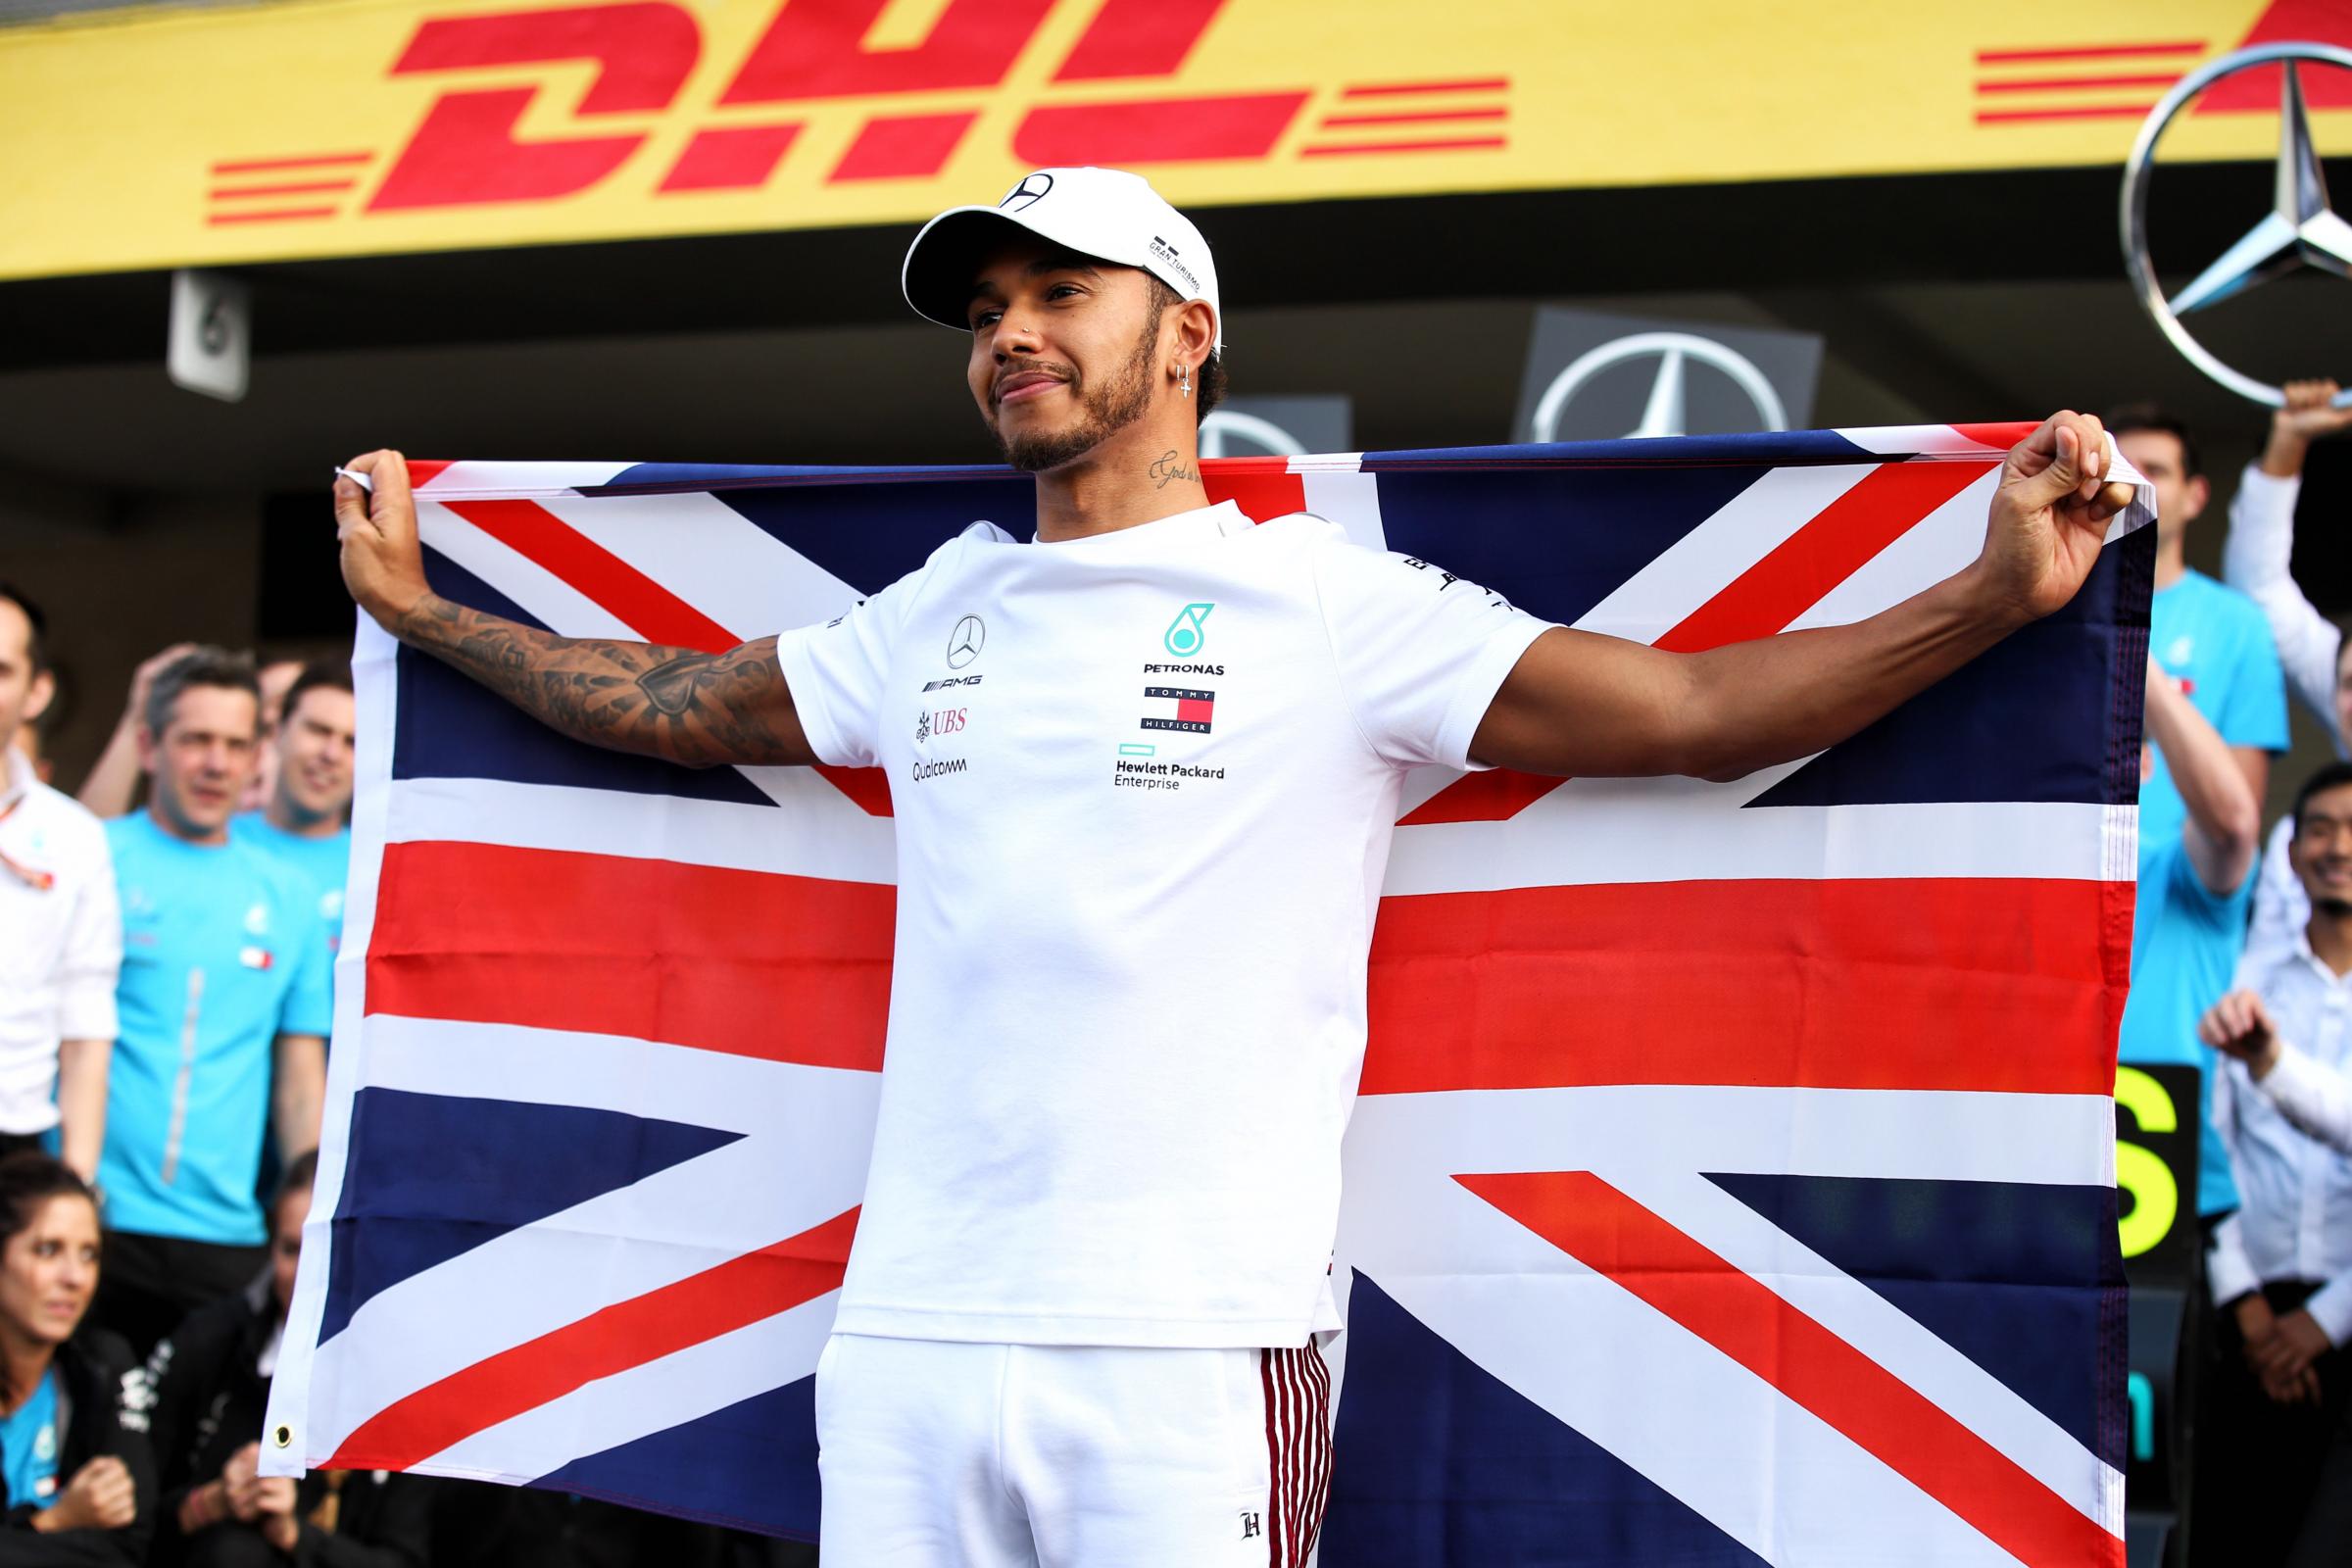 Lewis Hamilton named Peta person of the year